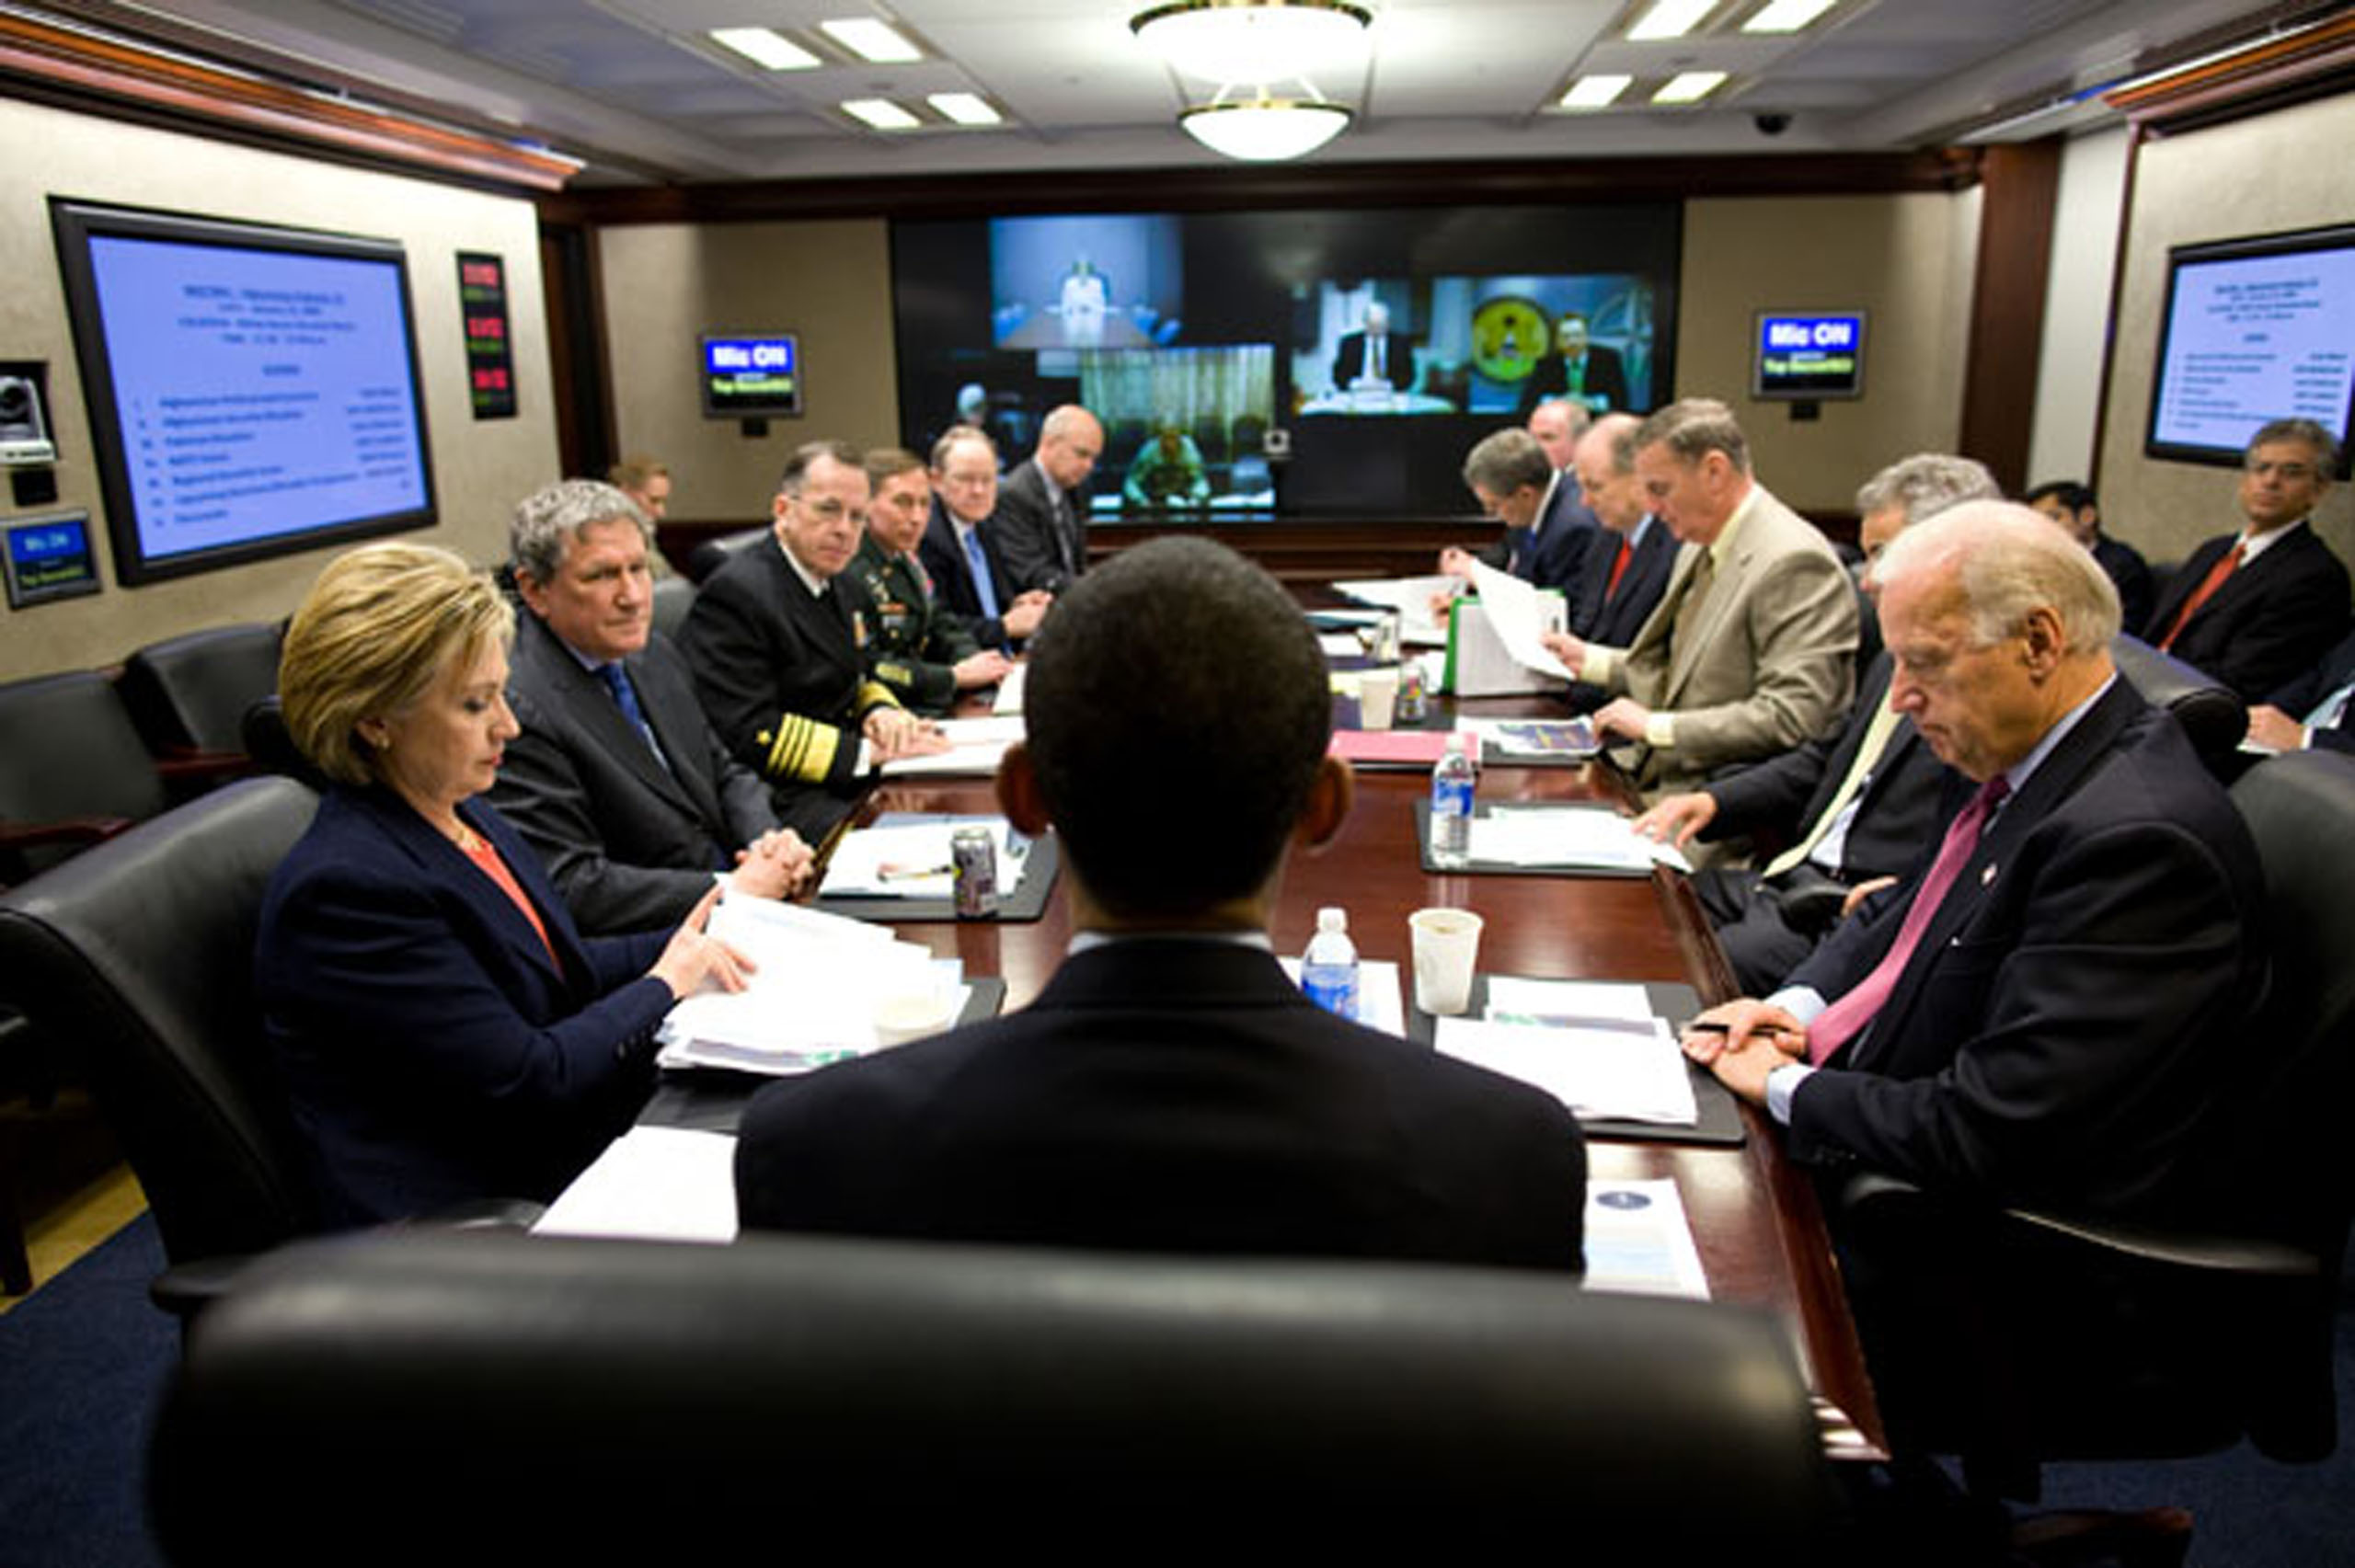 The President meets with his national security and intelligence team in the Situation Room of the White House for the first time, on Jan. 23, 2009.